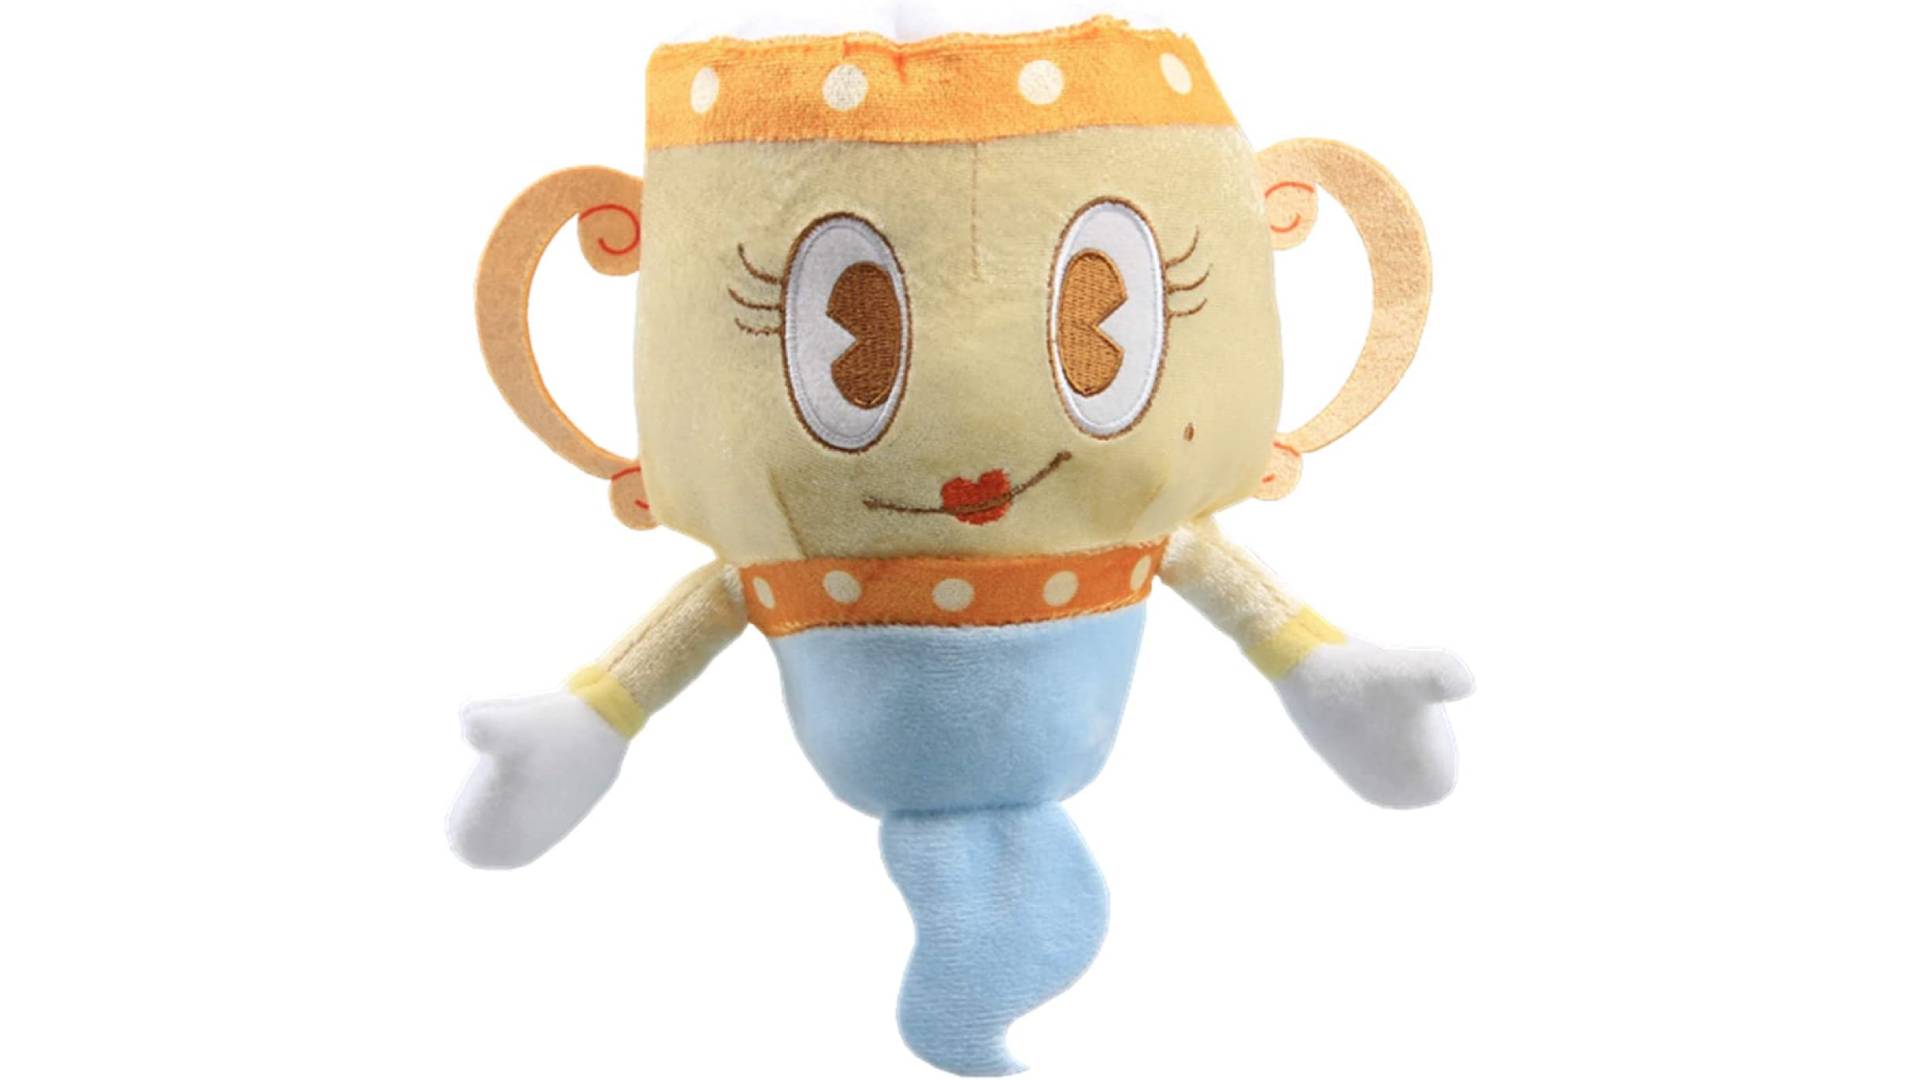 Cuphead plush: a product image shows a plush figure of Ms Chalice from Cuphead 